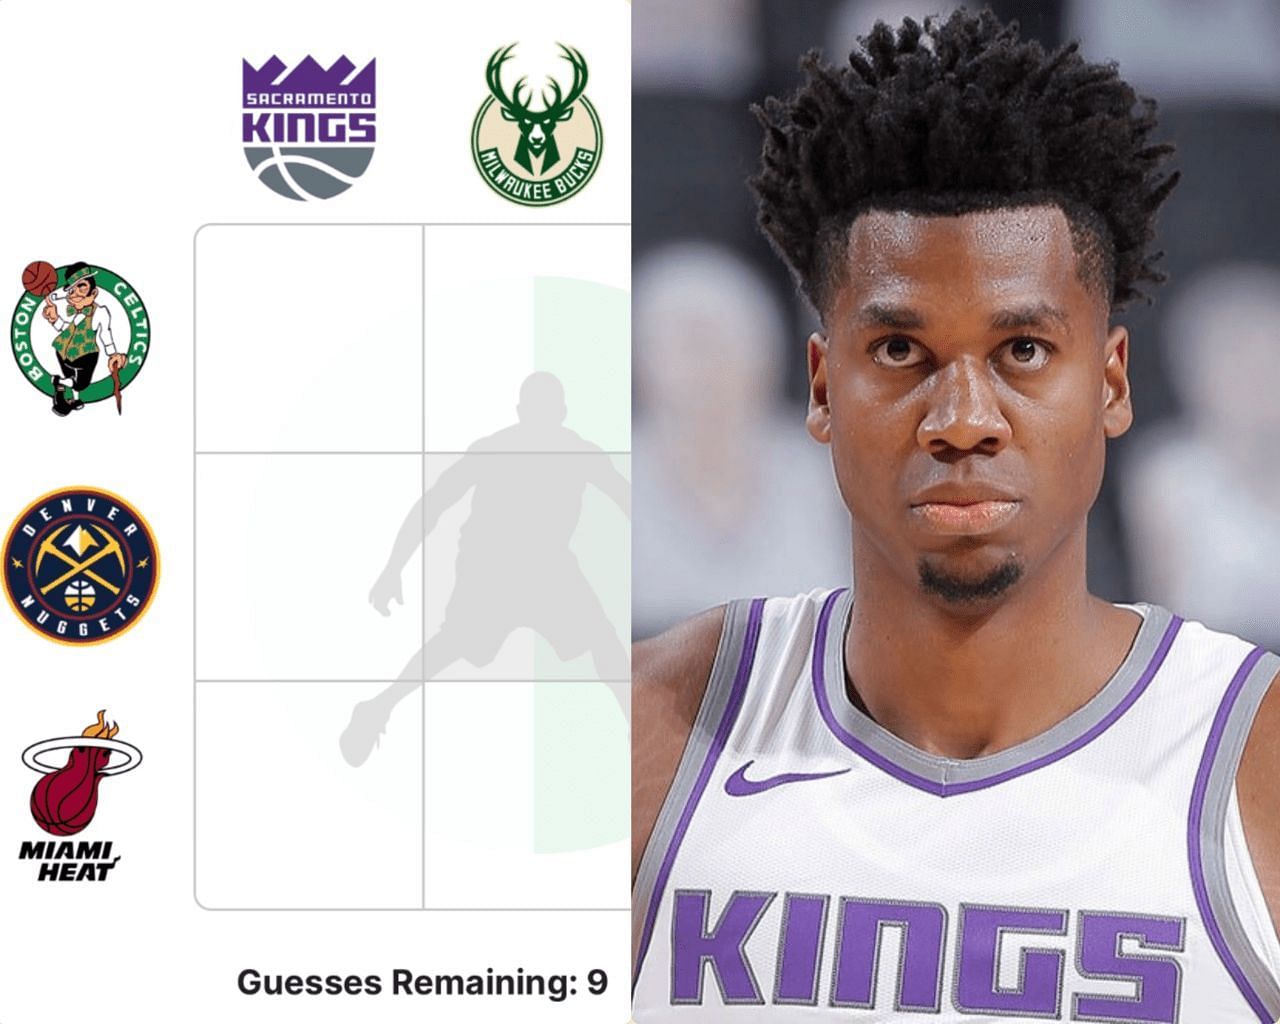 NBA Crossover Grid (July 17) and Hassan Whiteside during his time with the Sacramento Kings